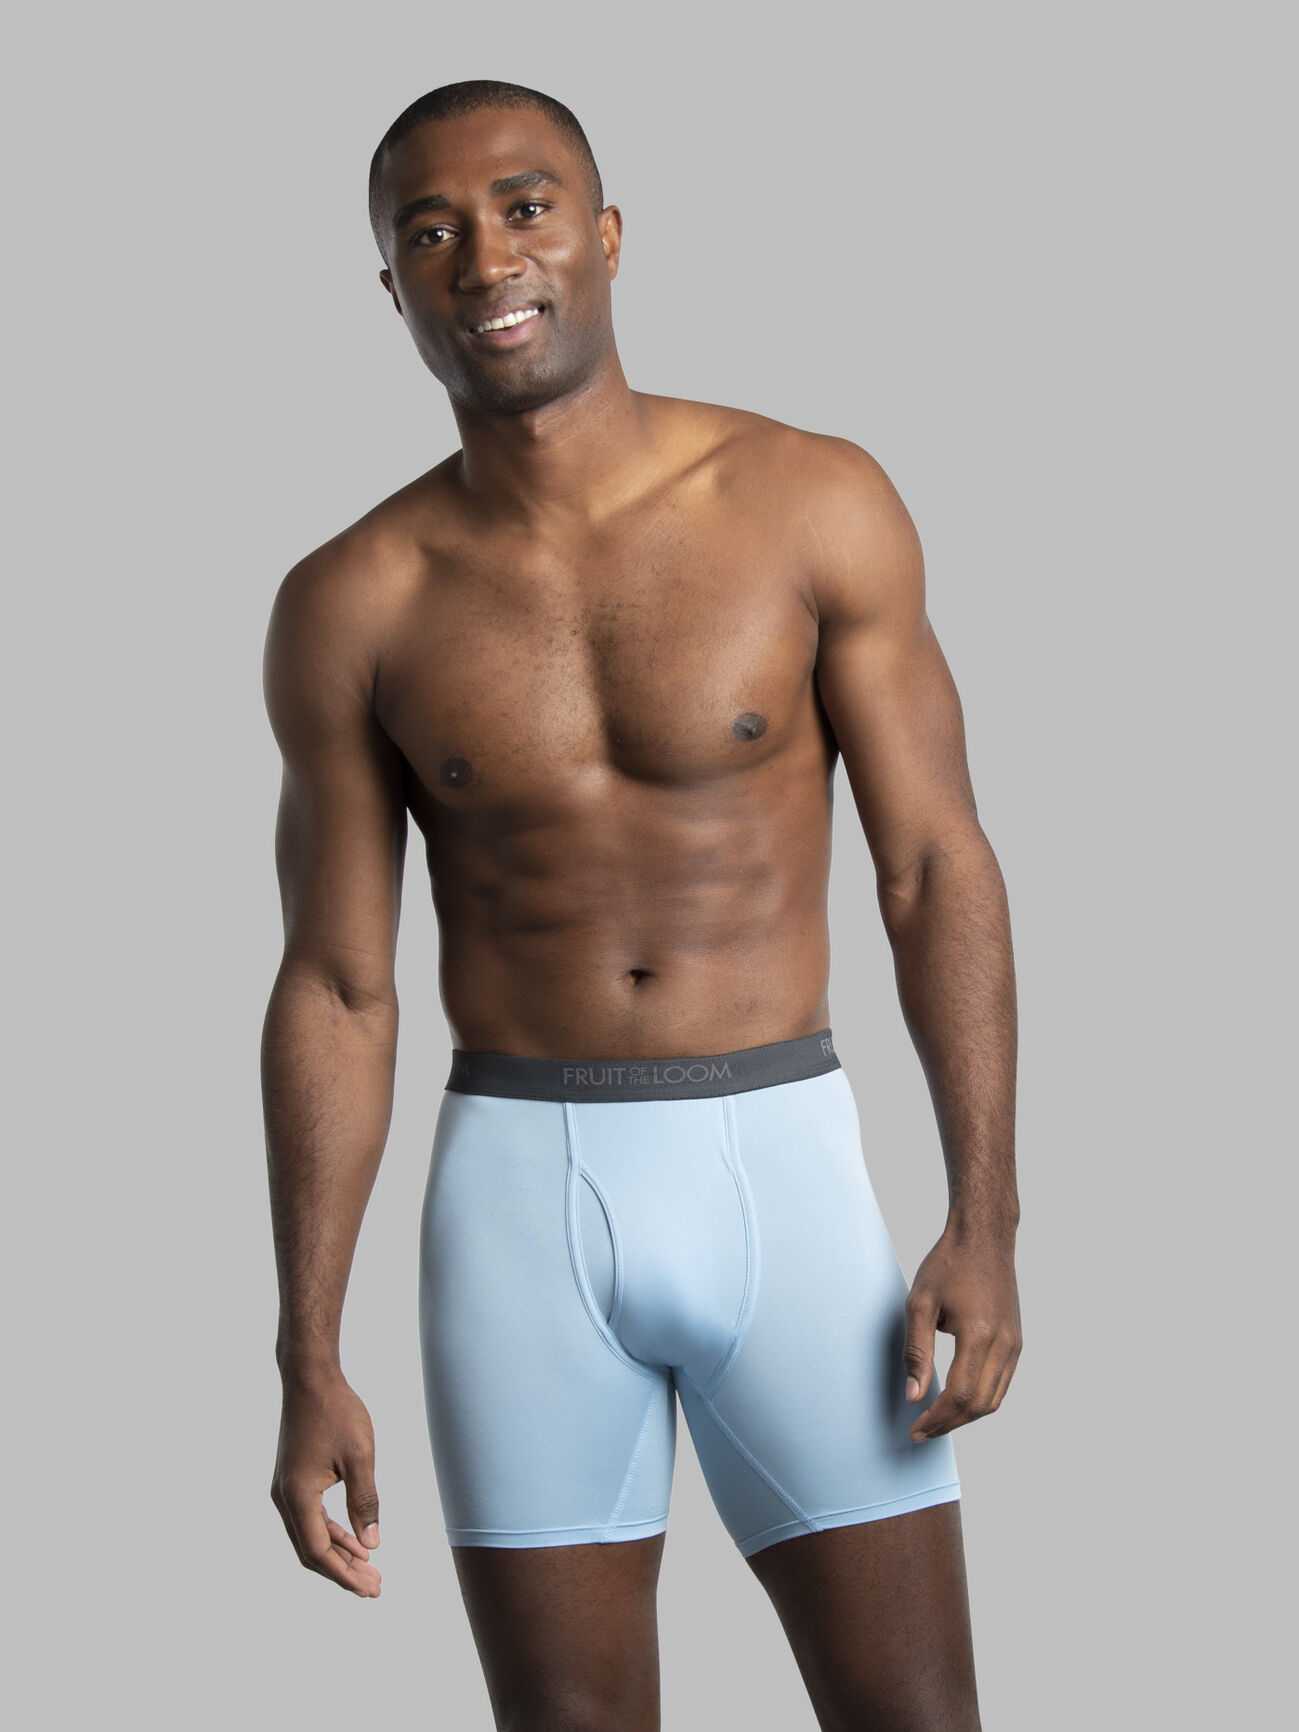 Mens Underwear Can Be Cheap - But Should They Be?